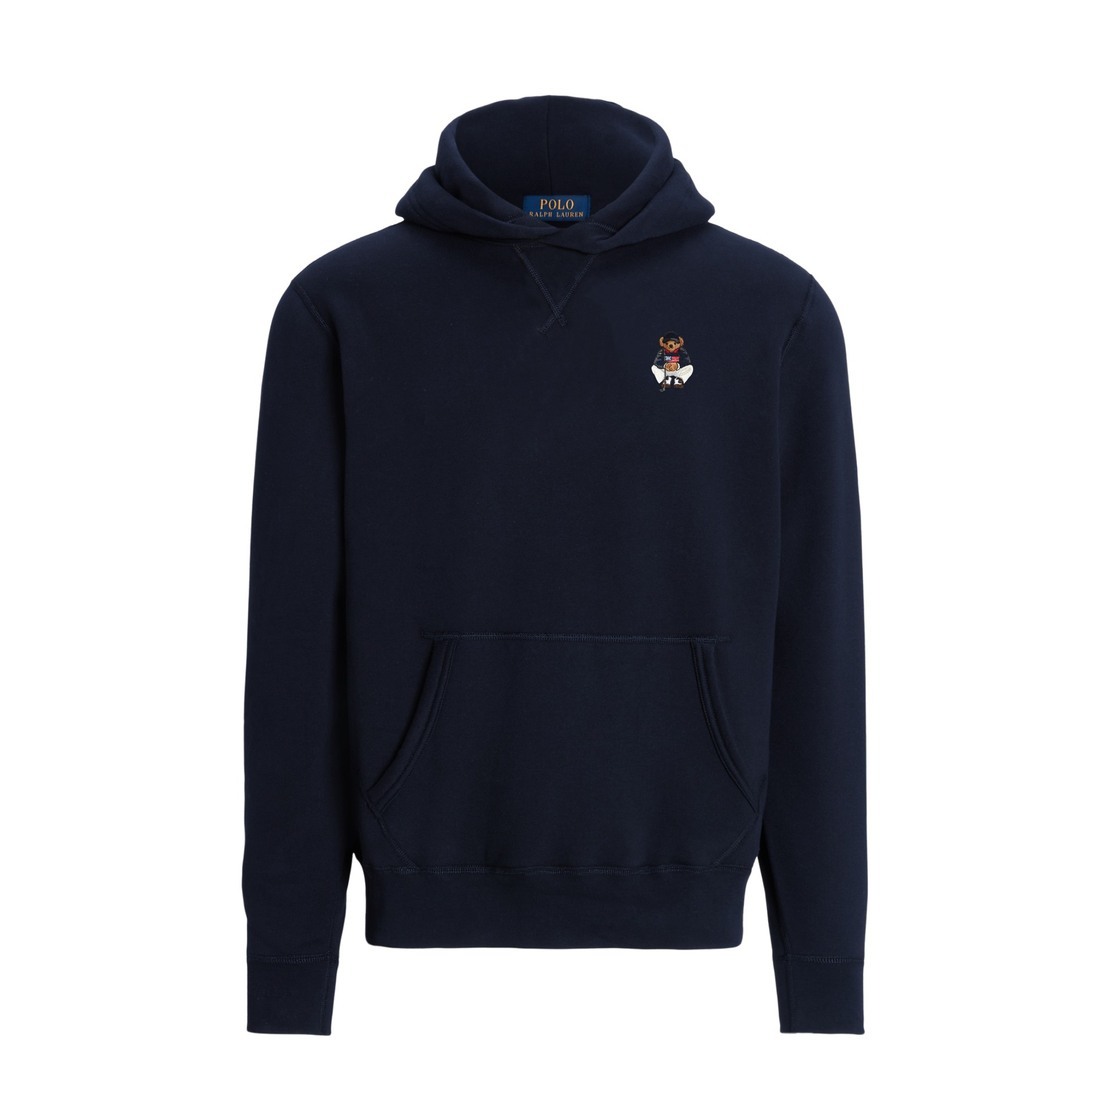   Essentials Men's Hooded Fleece Sweatshirt (Available in  Big & Tall), Black Heather, X-Small : Clothing, Shoes & Jewelry